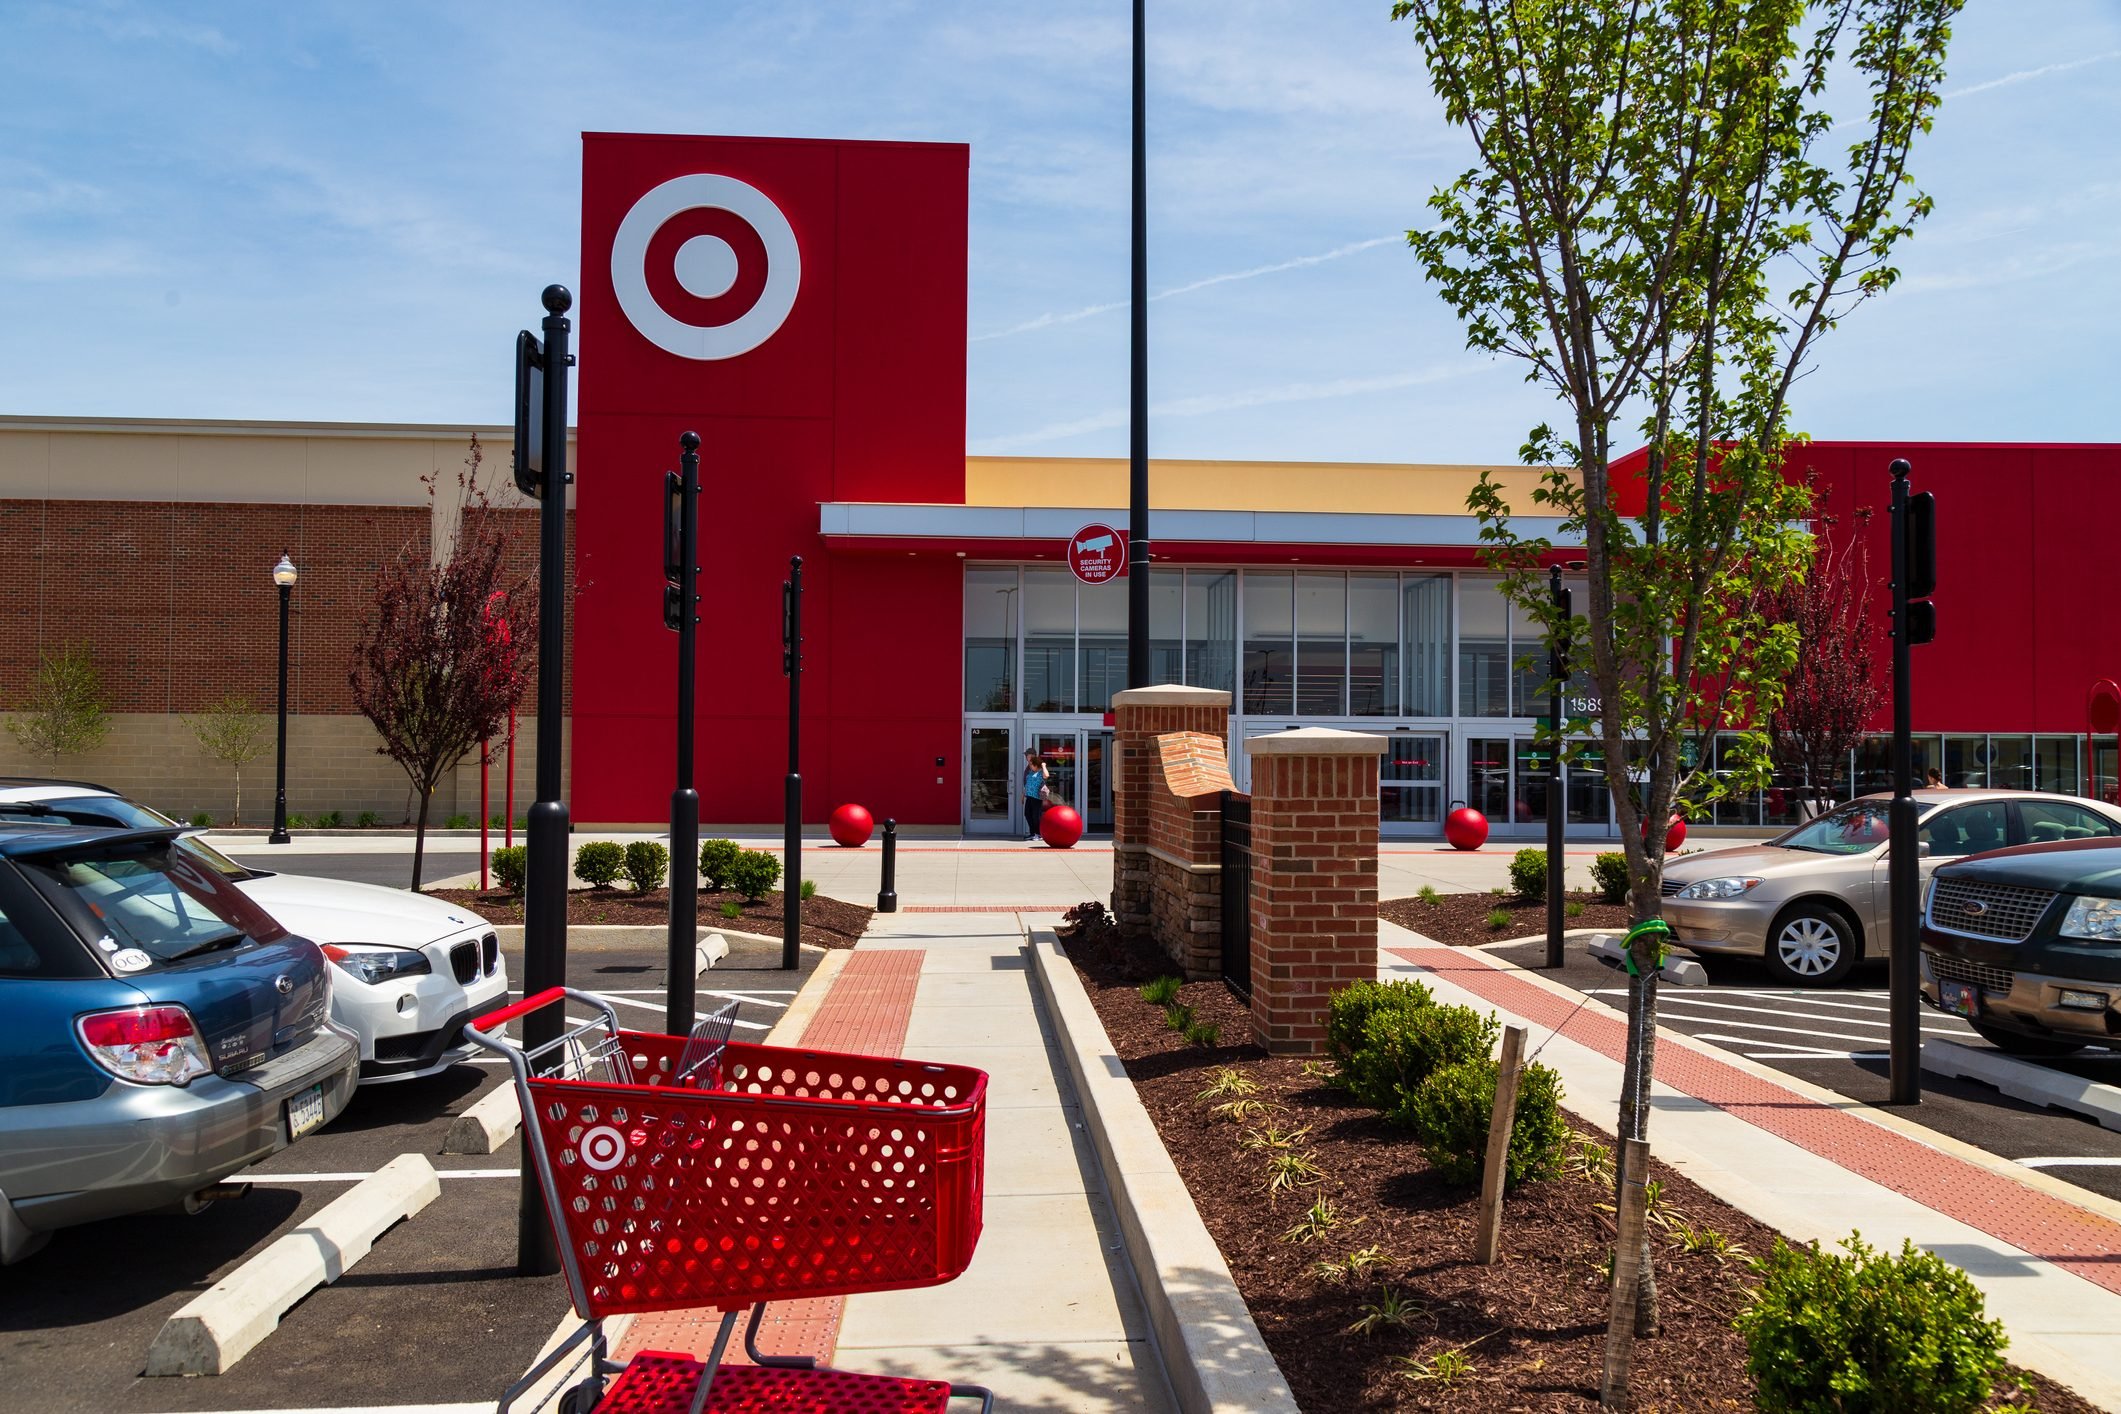 Target Deals: Best Products to Buy and Ones You Should Avoid